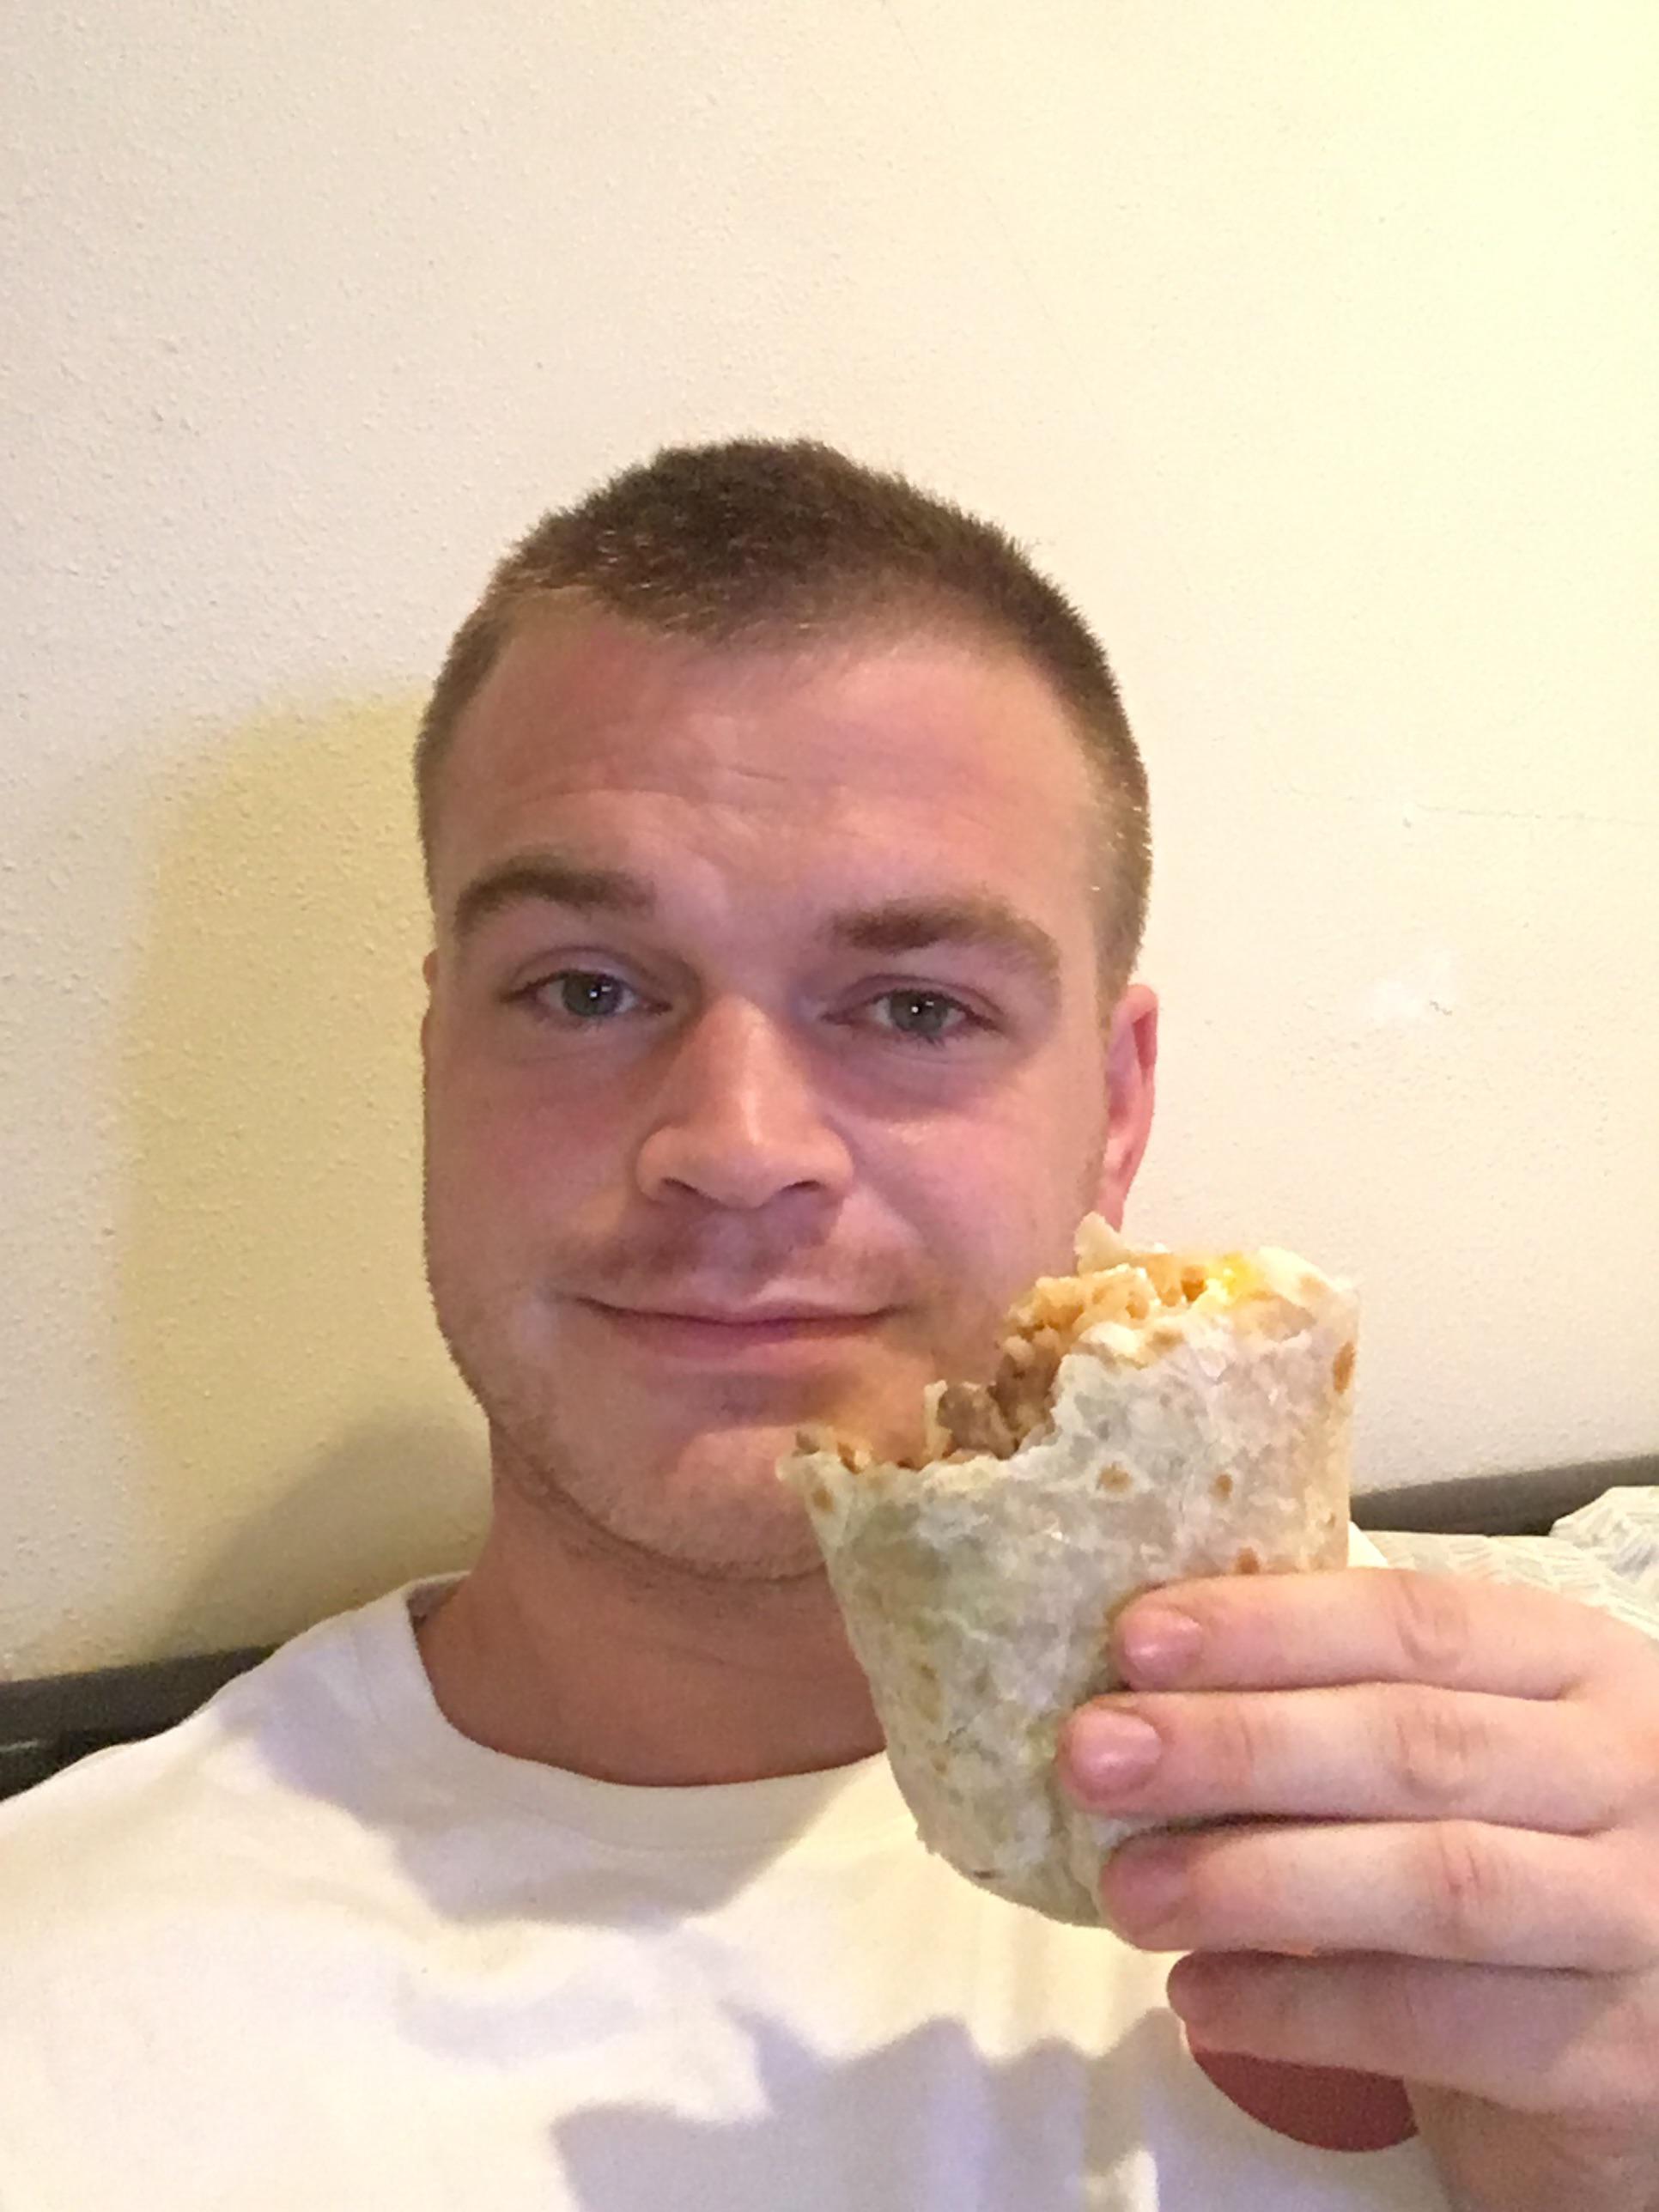 28 Just Me And My Burrito Scrolller